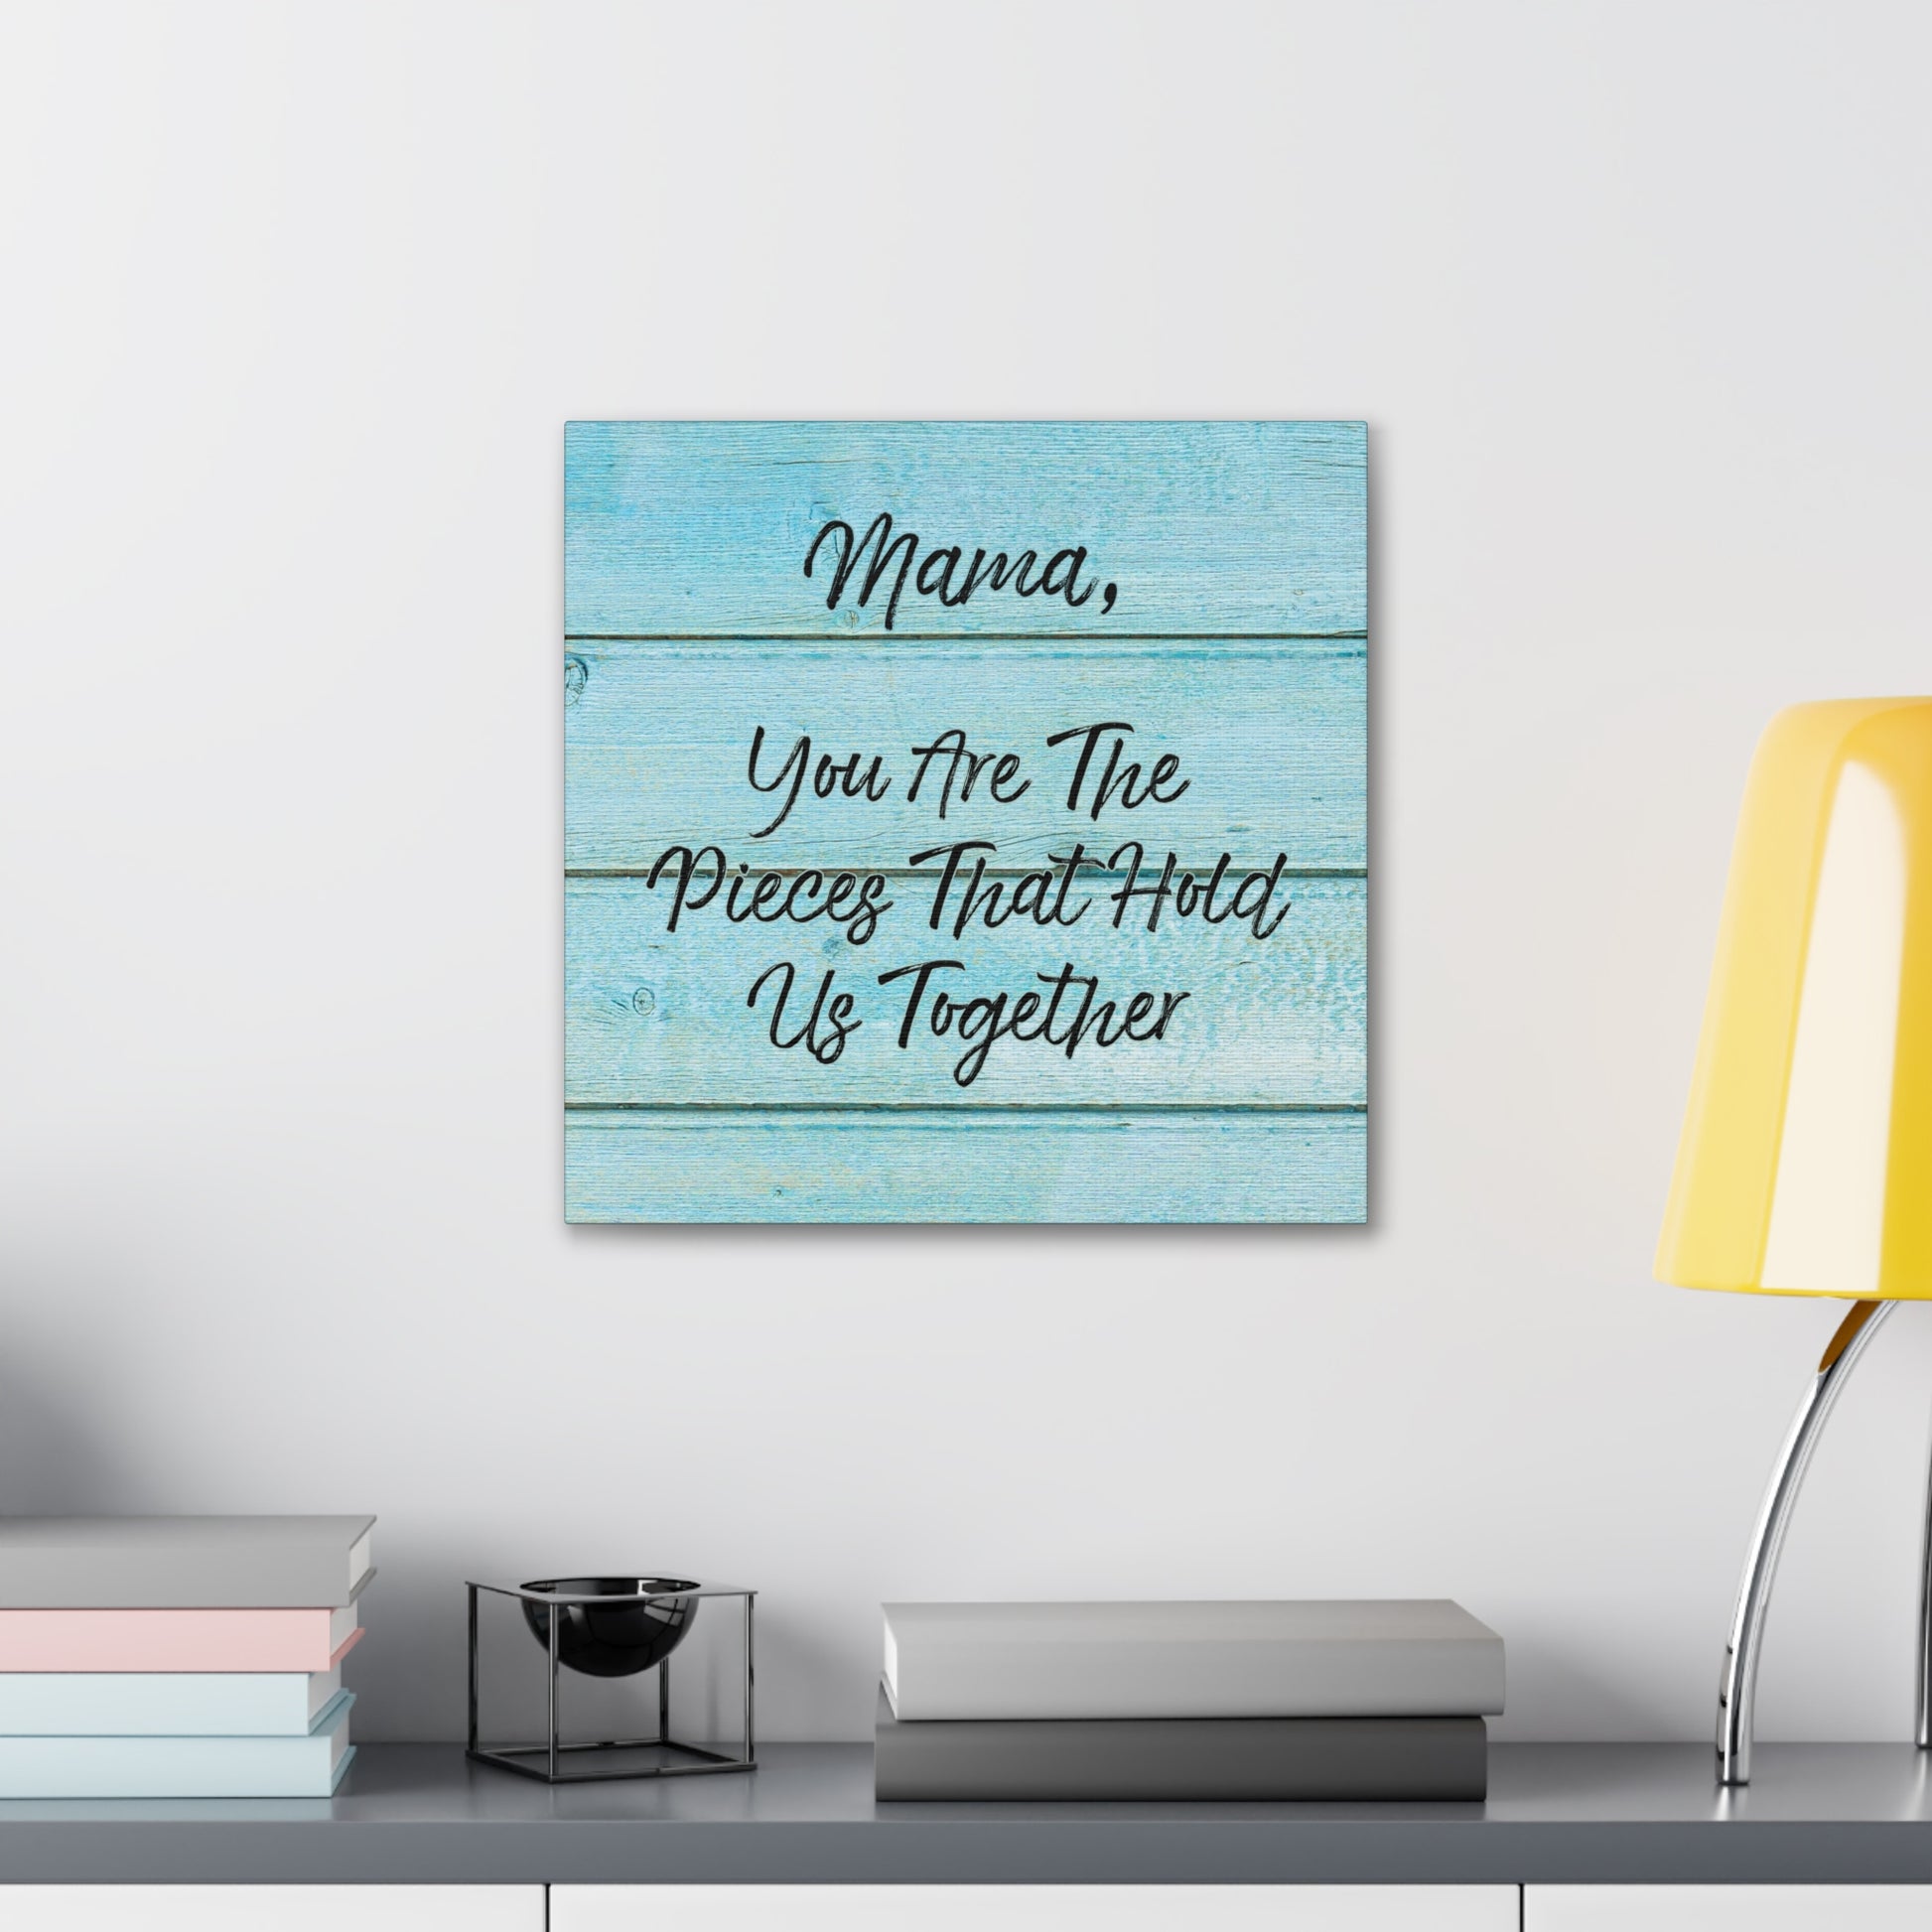 "Mama, You Are The Pieces That Hold Us Together" Wall Art - Weave Got Gifts - Unique Gifts You Won’t Find Anywhere Else!